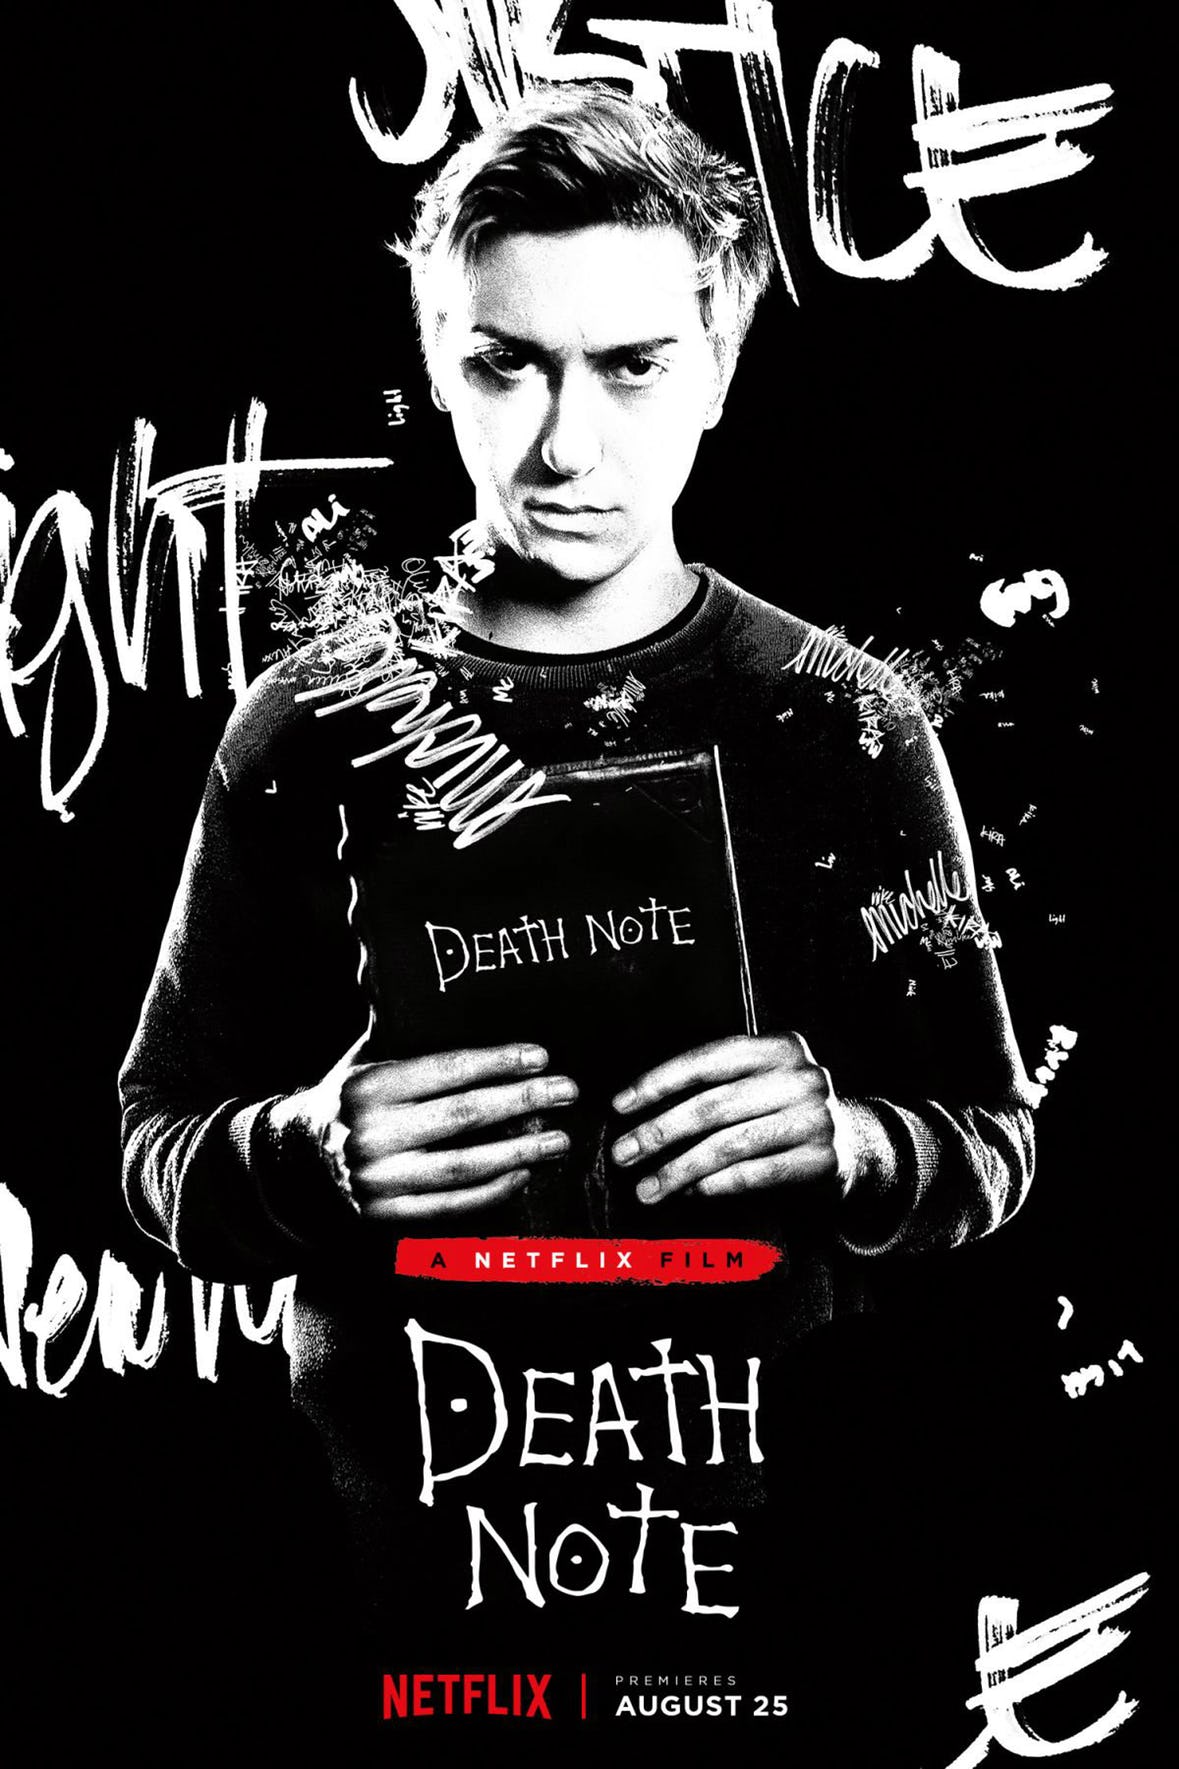 Death Note Light Poster